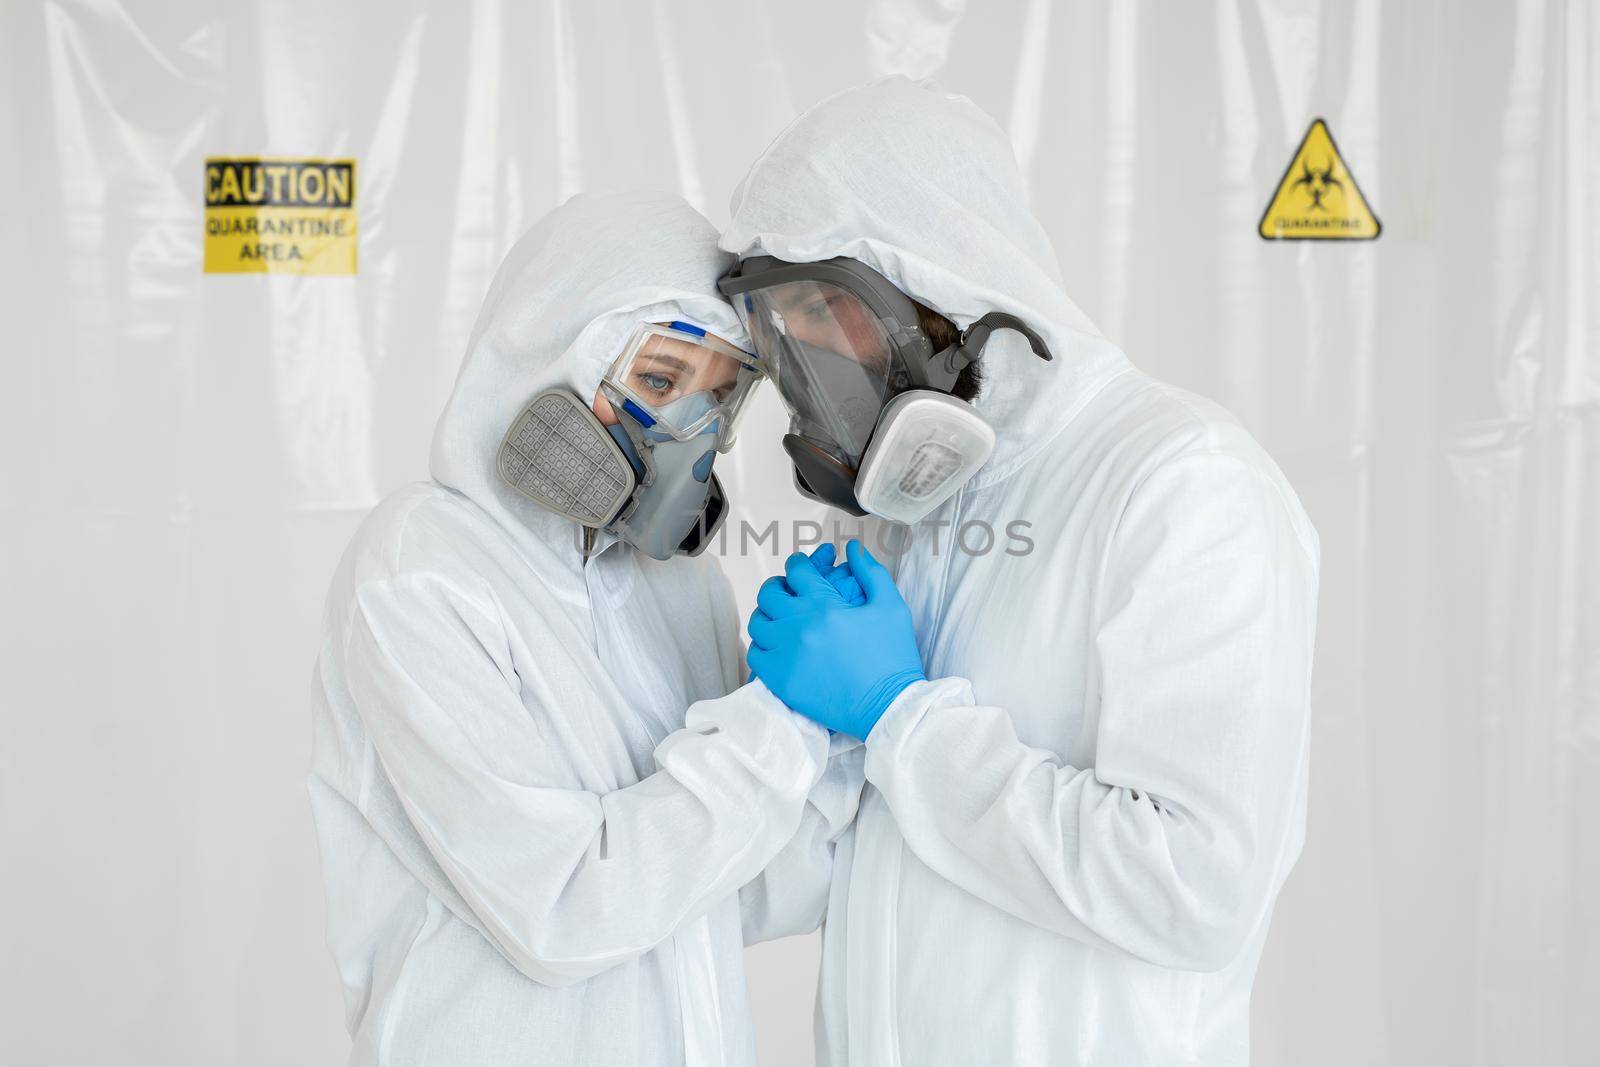 Portraits of the doctor: a man and a woman in protective suits and respirators holding hands during quarantine. Covid-19 by StudioPeace